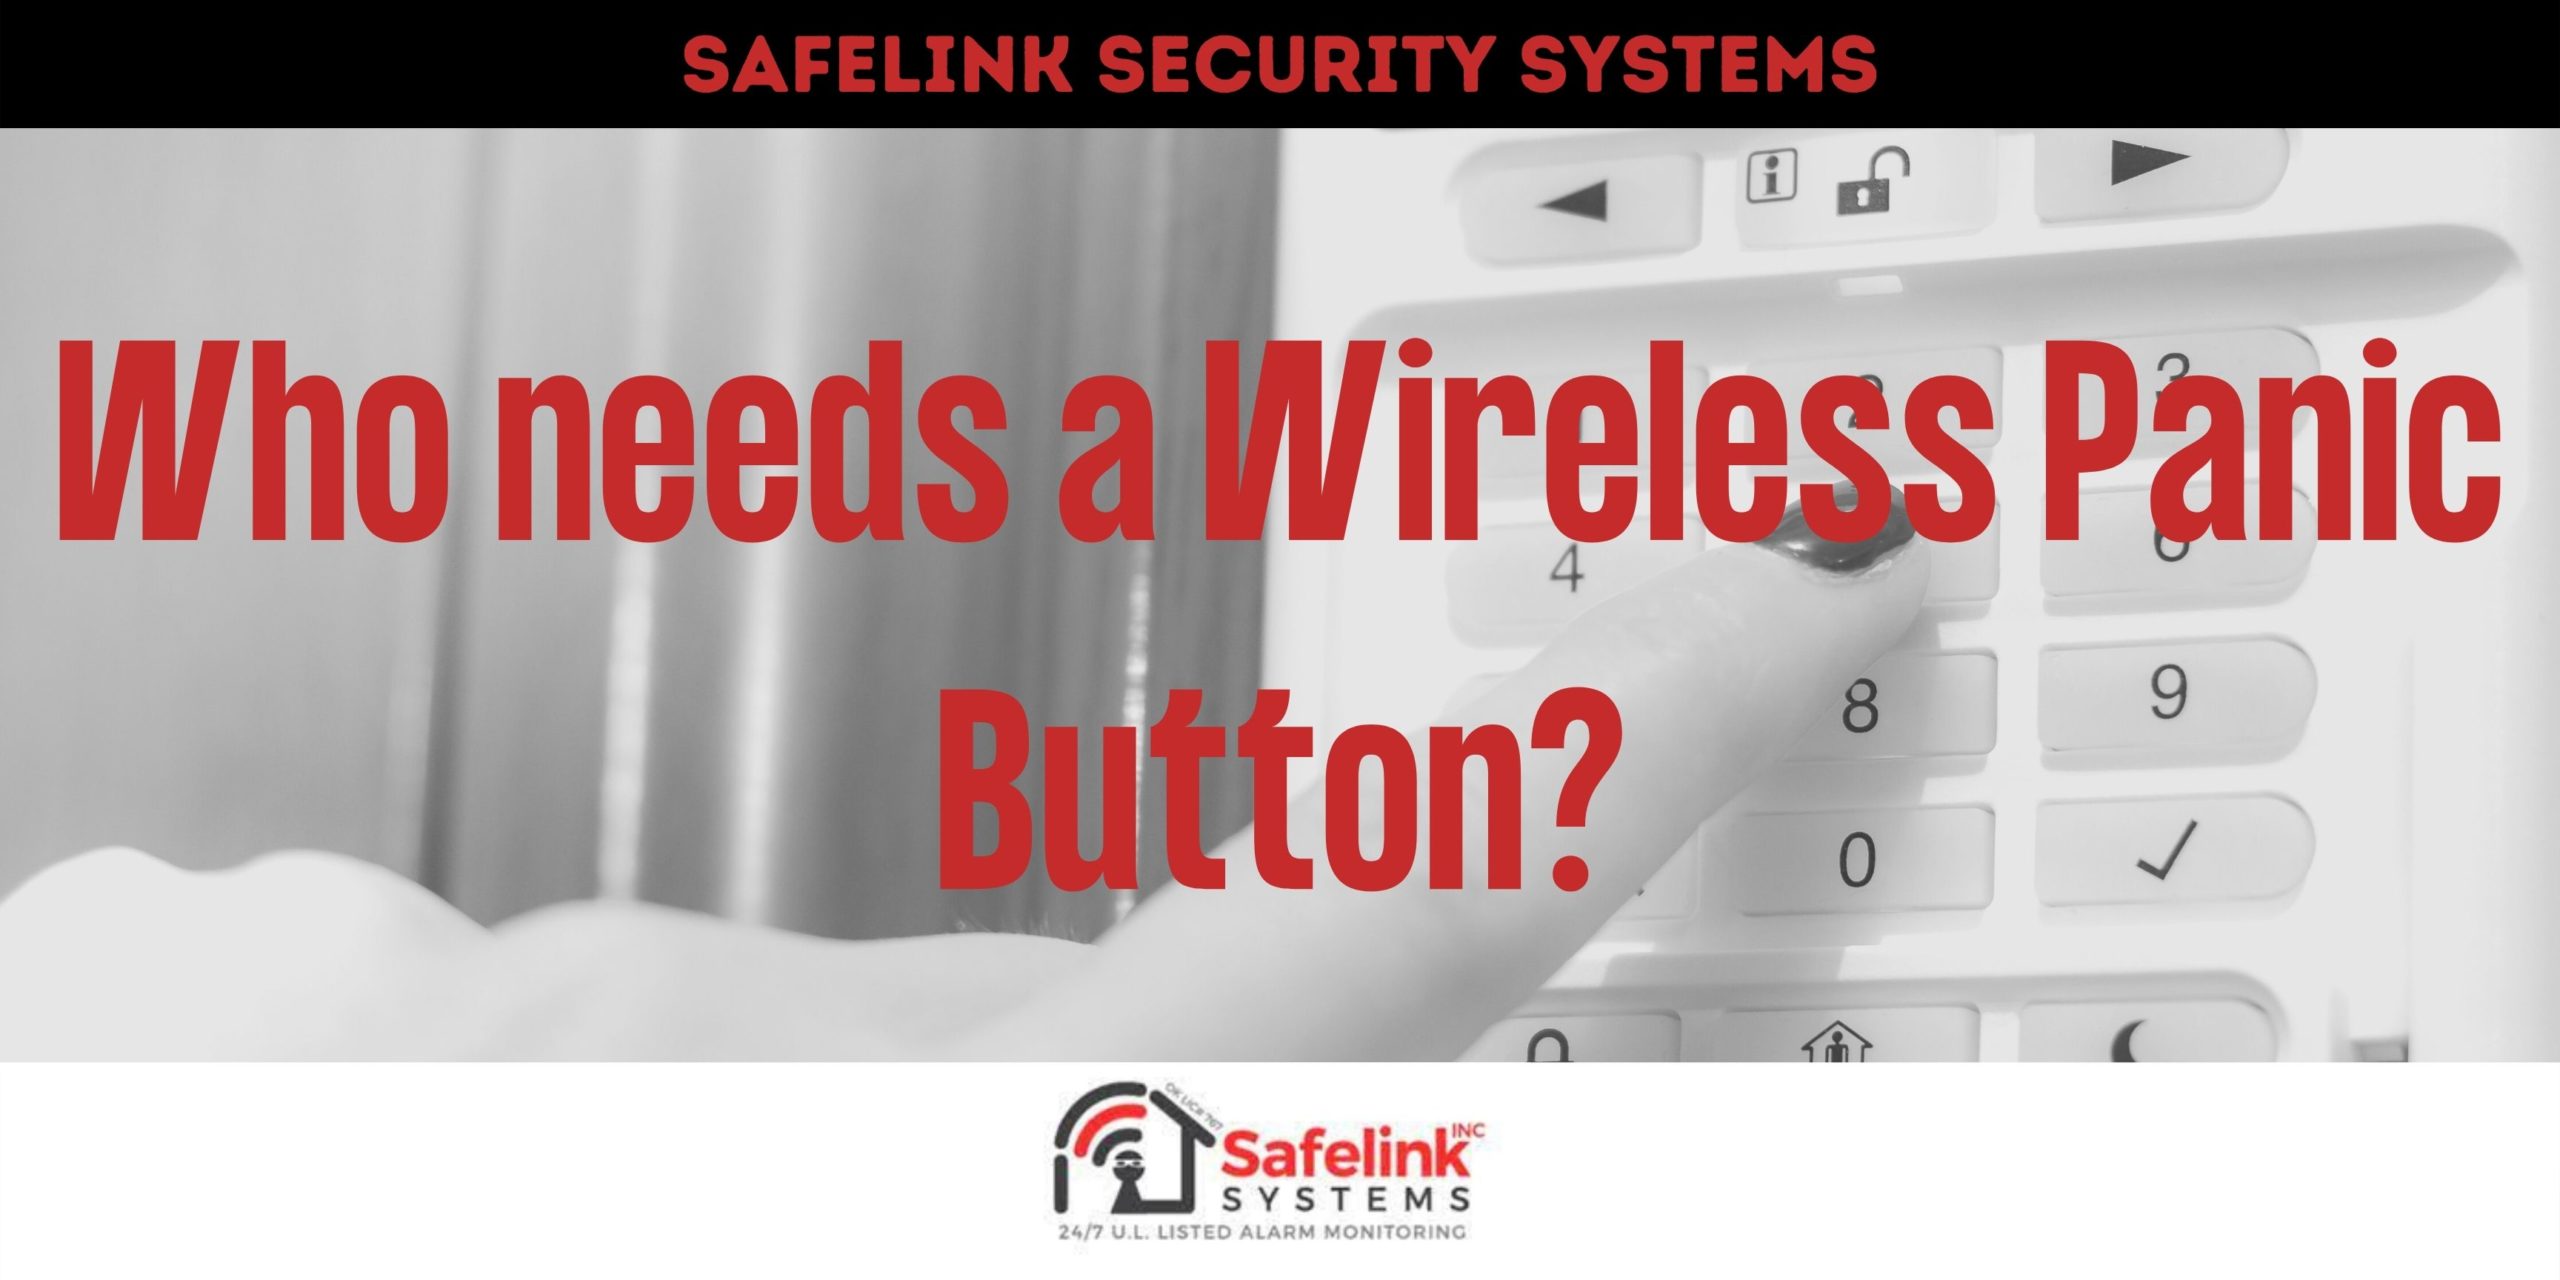 This banner shows the question related to wireless panic buttons.